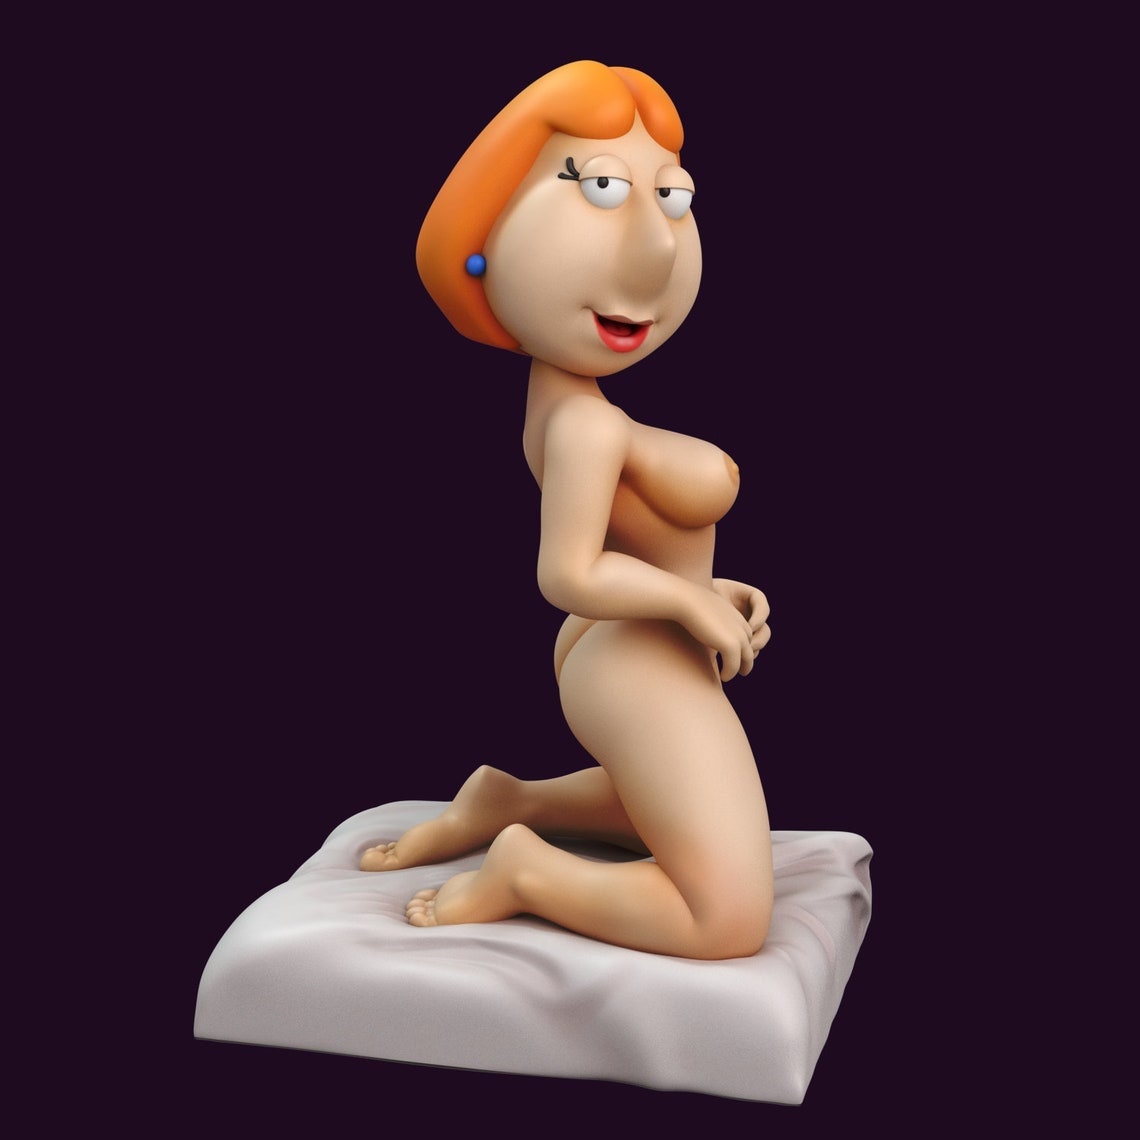 Lois griffin sexy